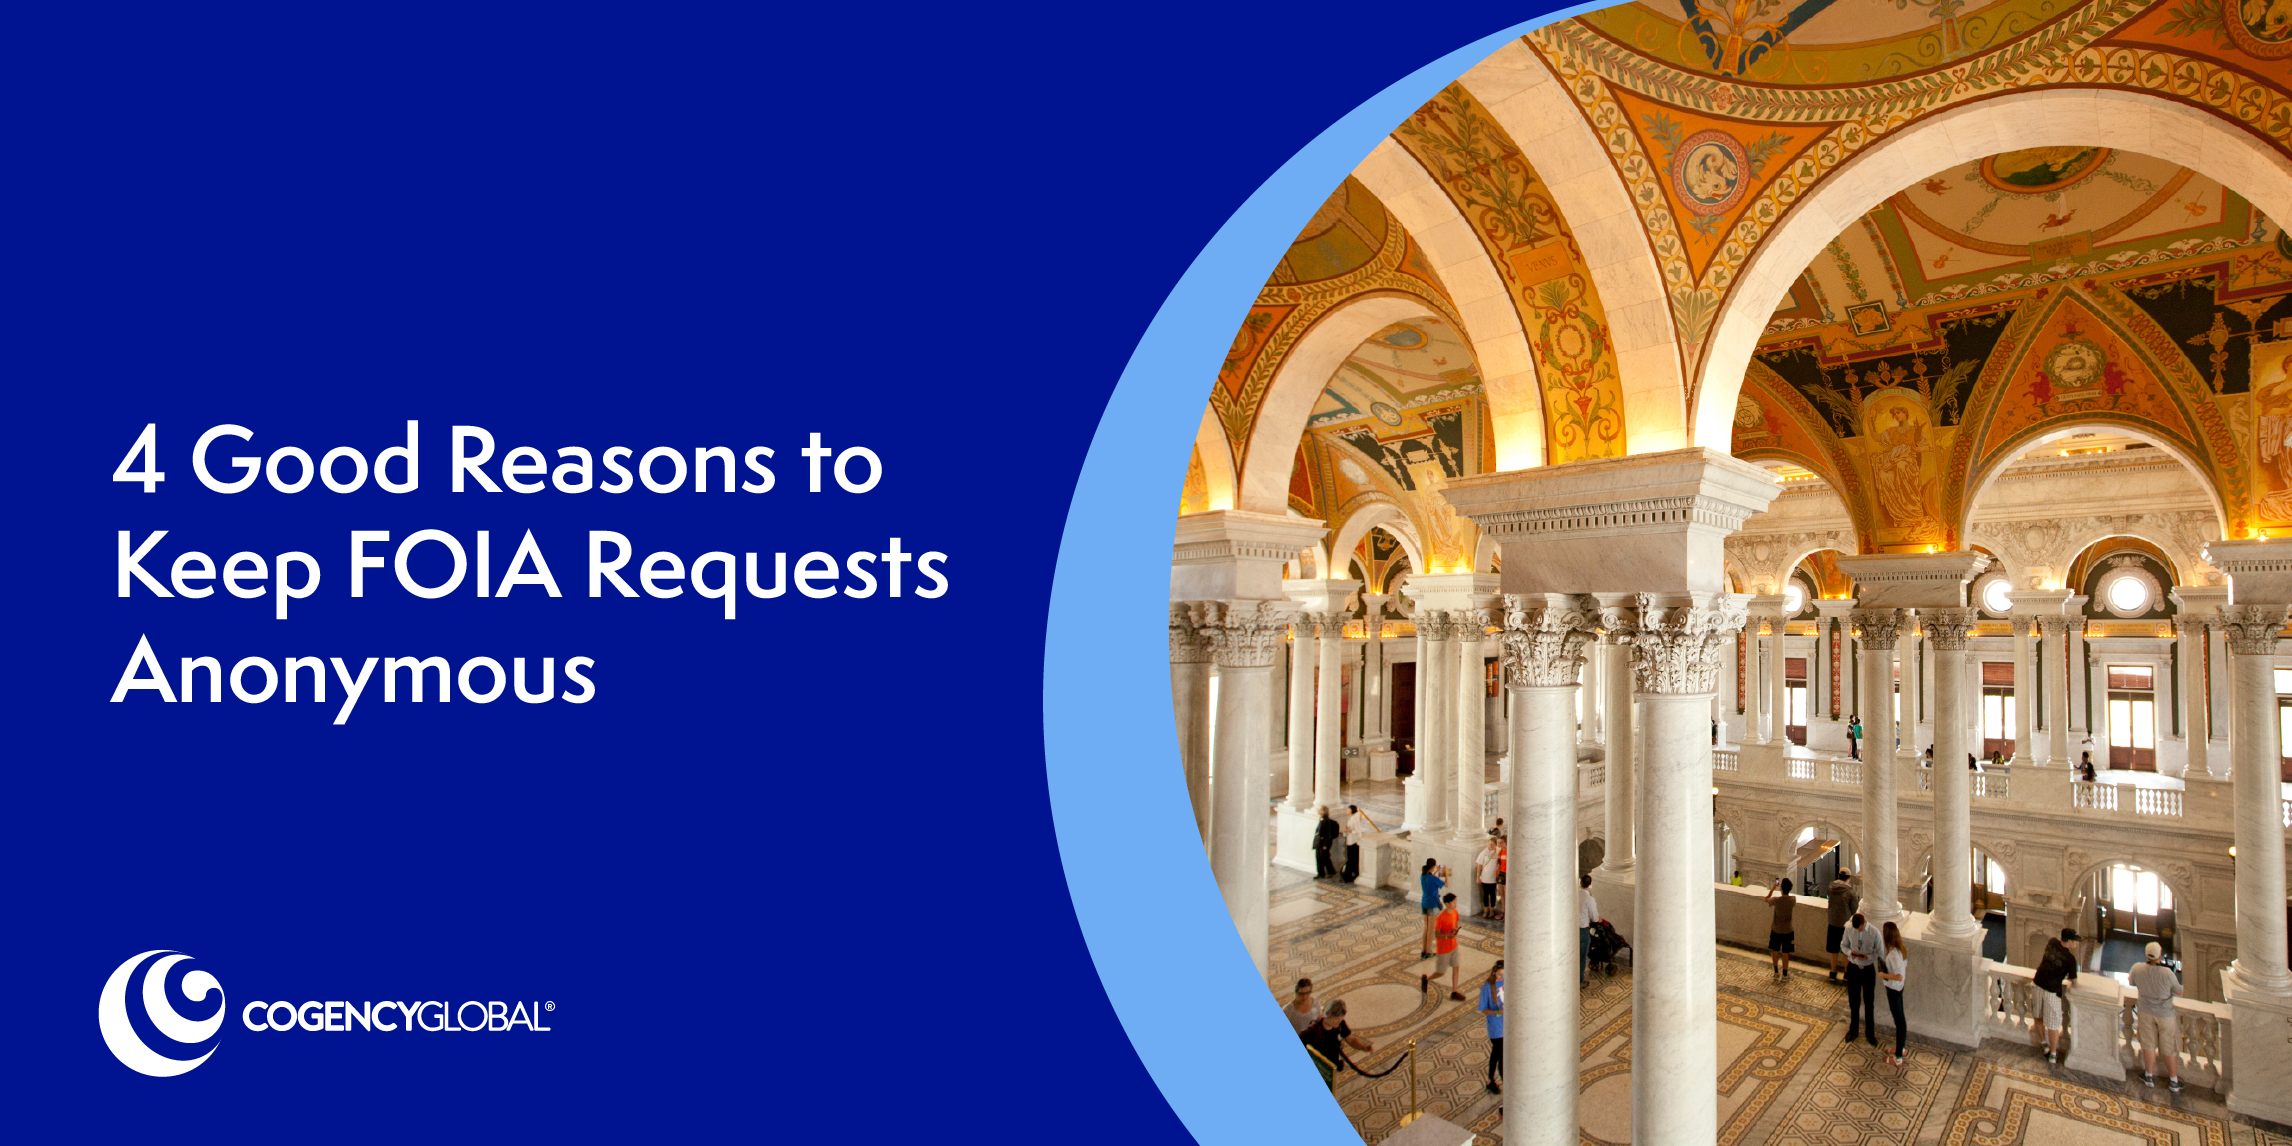 4 Good Reasons to Keep FOIA Requests Anonymous